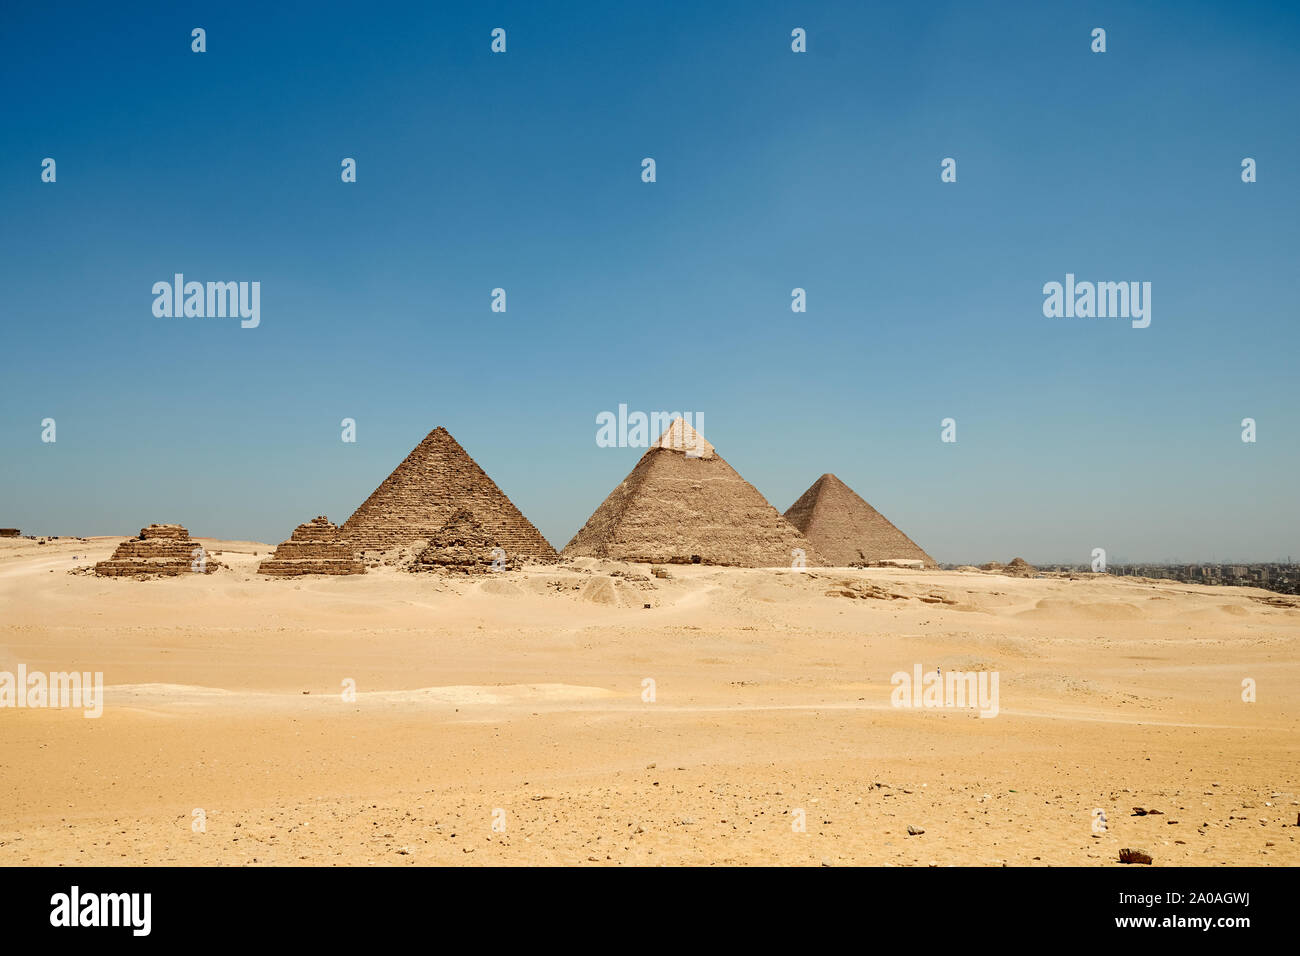 The Giza pyramid complex, also called the Giza Necropolis on the Giza Plateau in Egypt that includes the Great Pyramid of Giza, the Pyramid of Khafre, Stock Photo